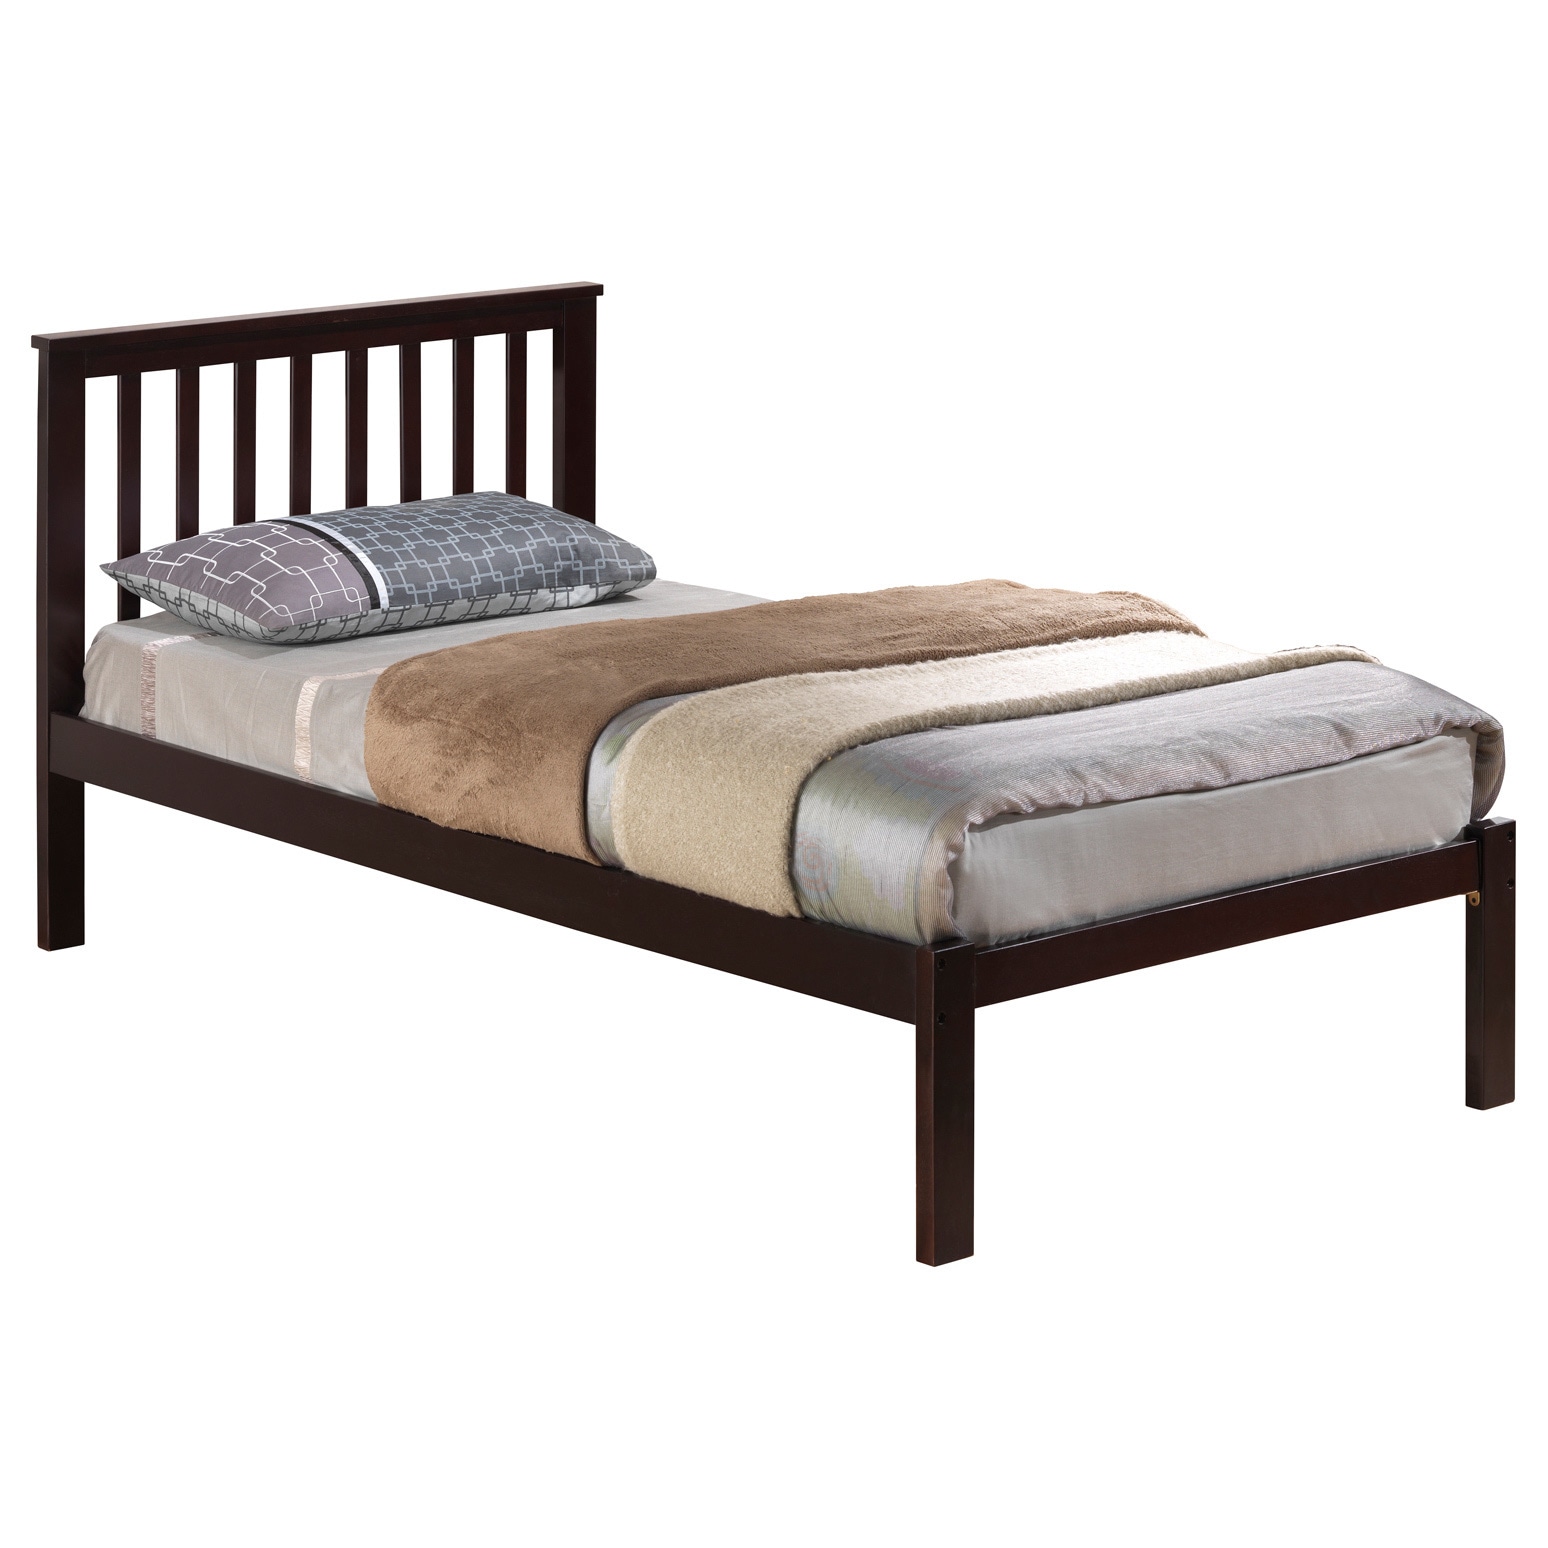 Donco Kids Mission Bed With Optional Trundle Or Drawers